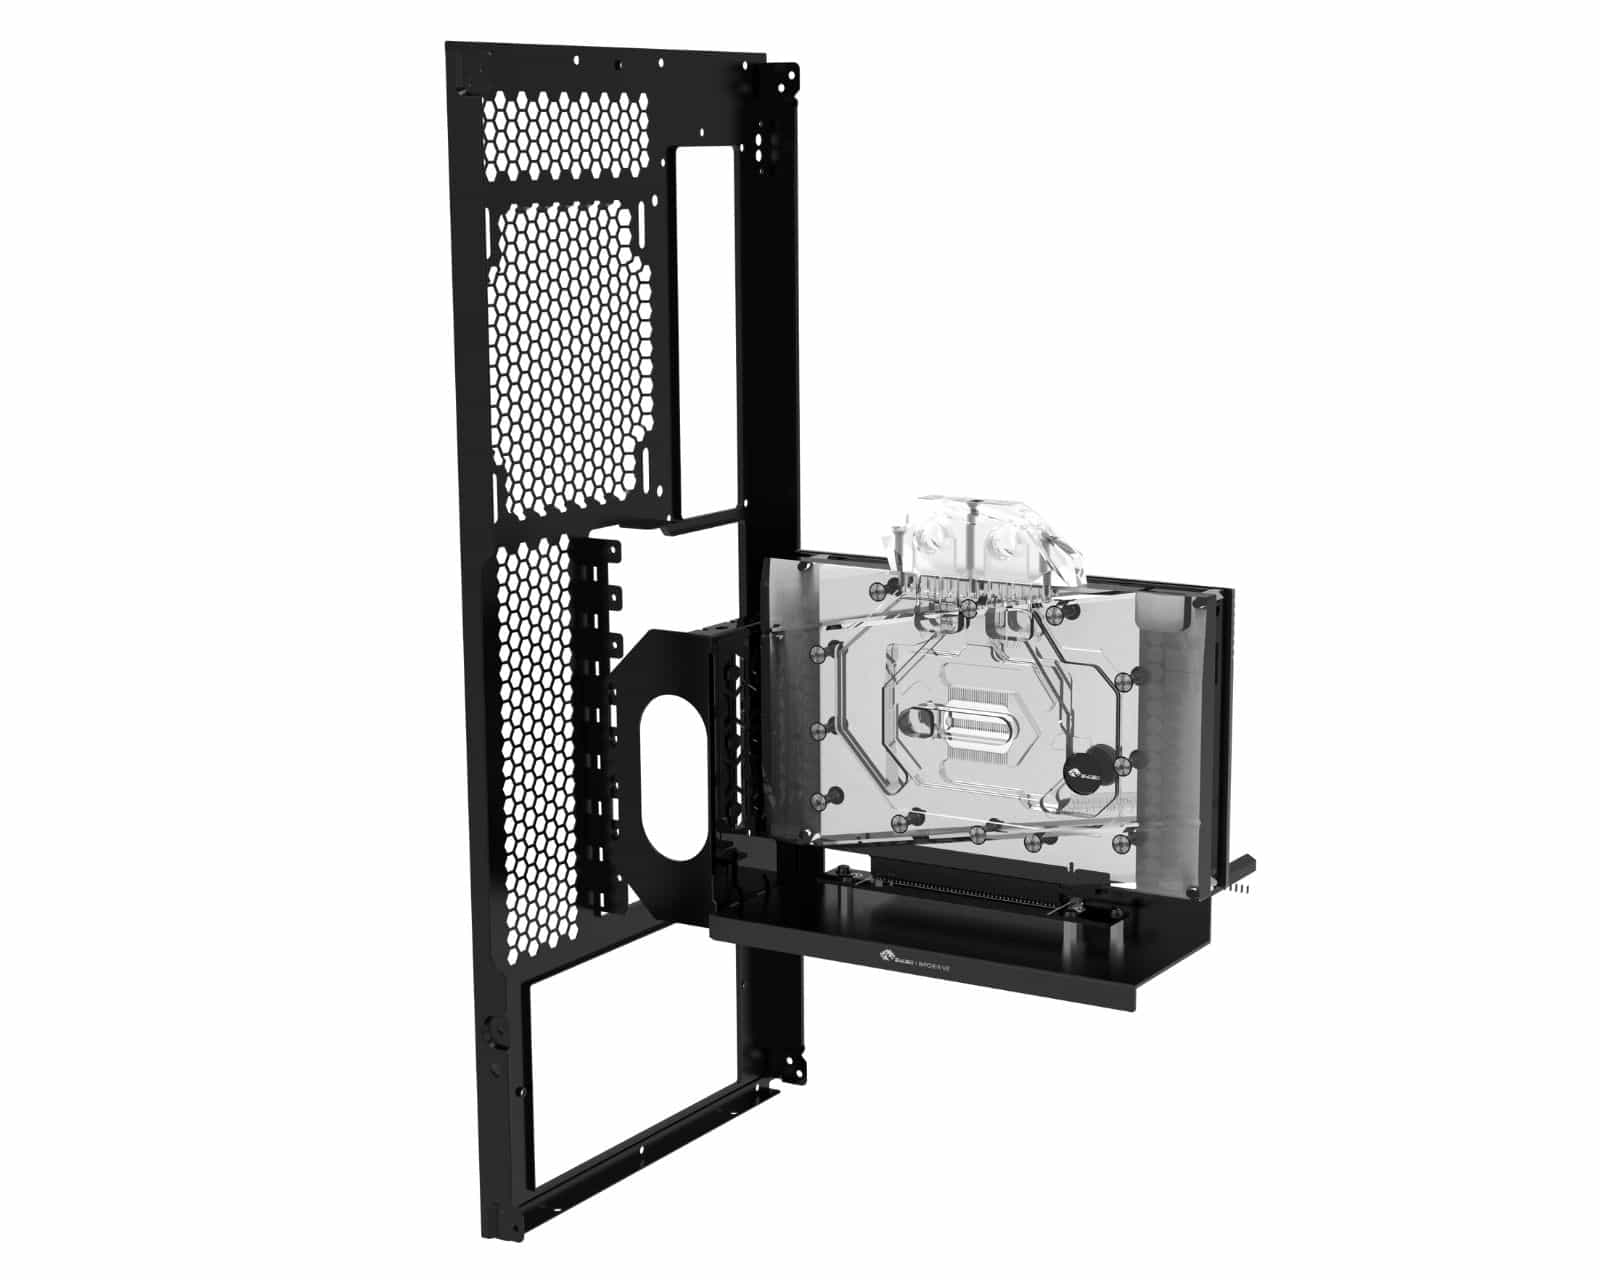 Bykski Vertical Mount/Holder for GPU Showcasing with fixed high-performance PCI-E Extension cable (B-6HPCI-E-X-V2K))